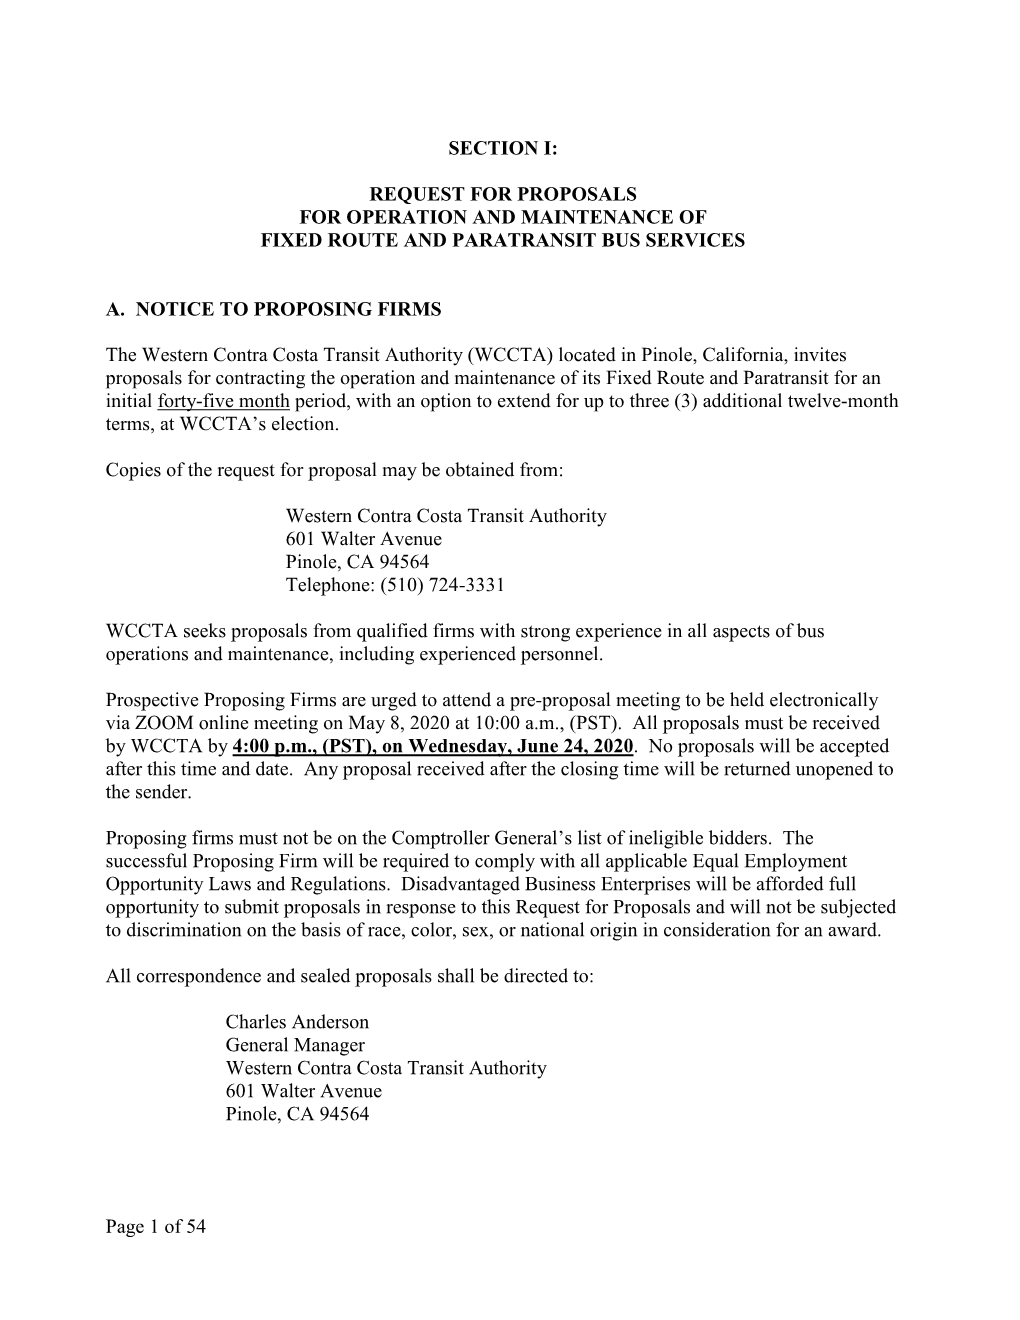 Page 1 of 54 SECTION I: REQUEST for PROPOSALS for OPERATION and MAINTENANCE of FIXED ROUTE and PARATRANSIT BUS SERVICES A. NOTIC